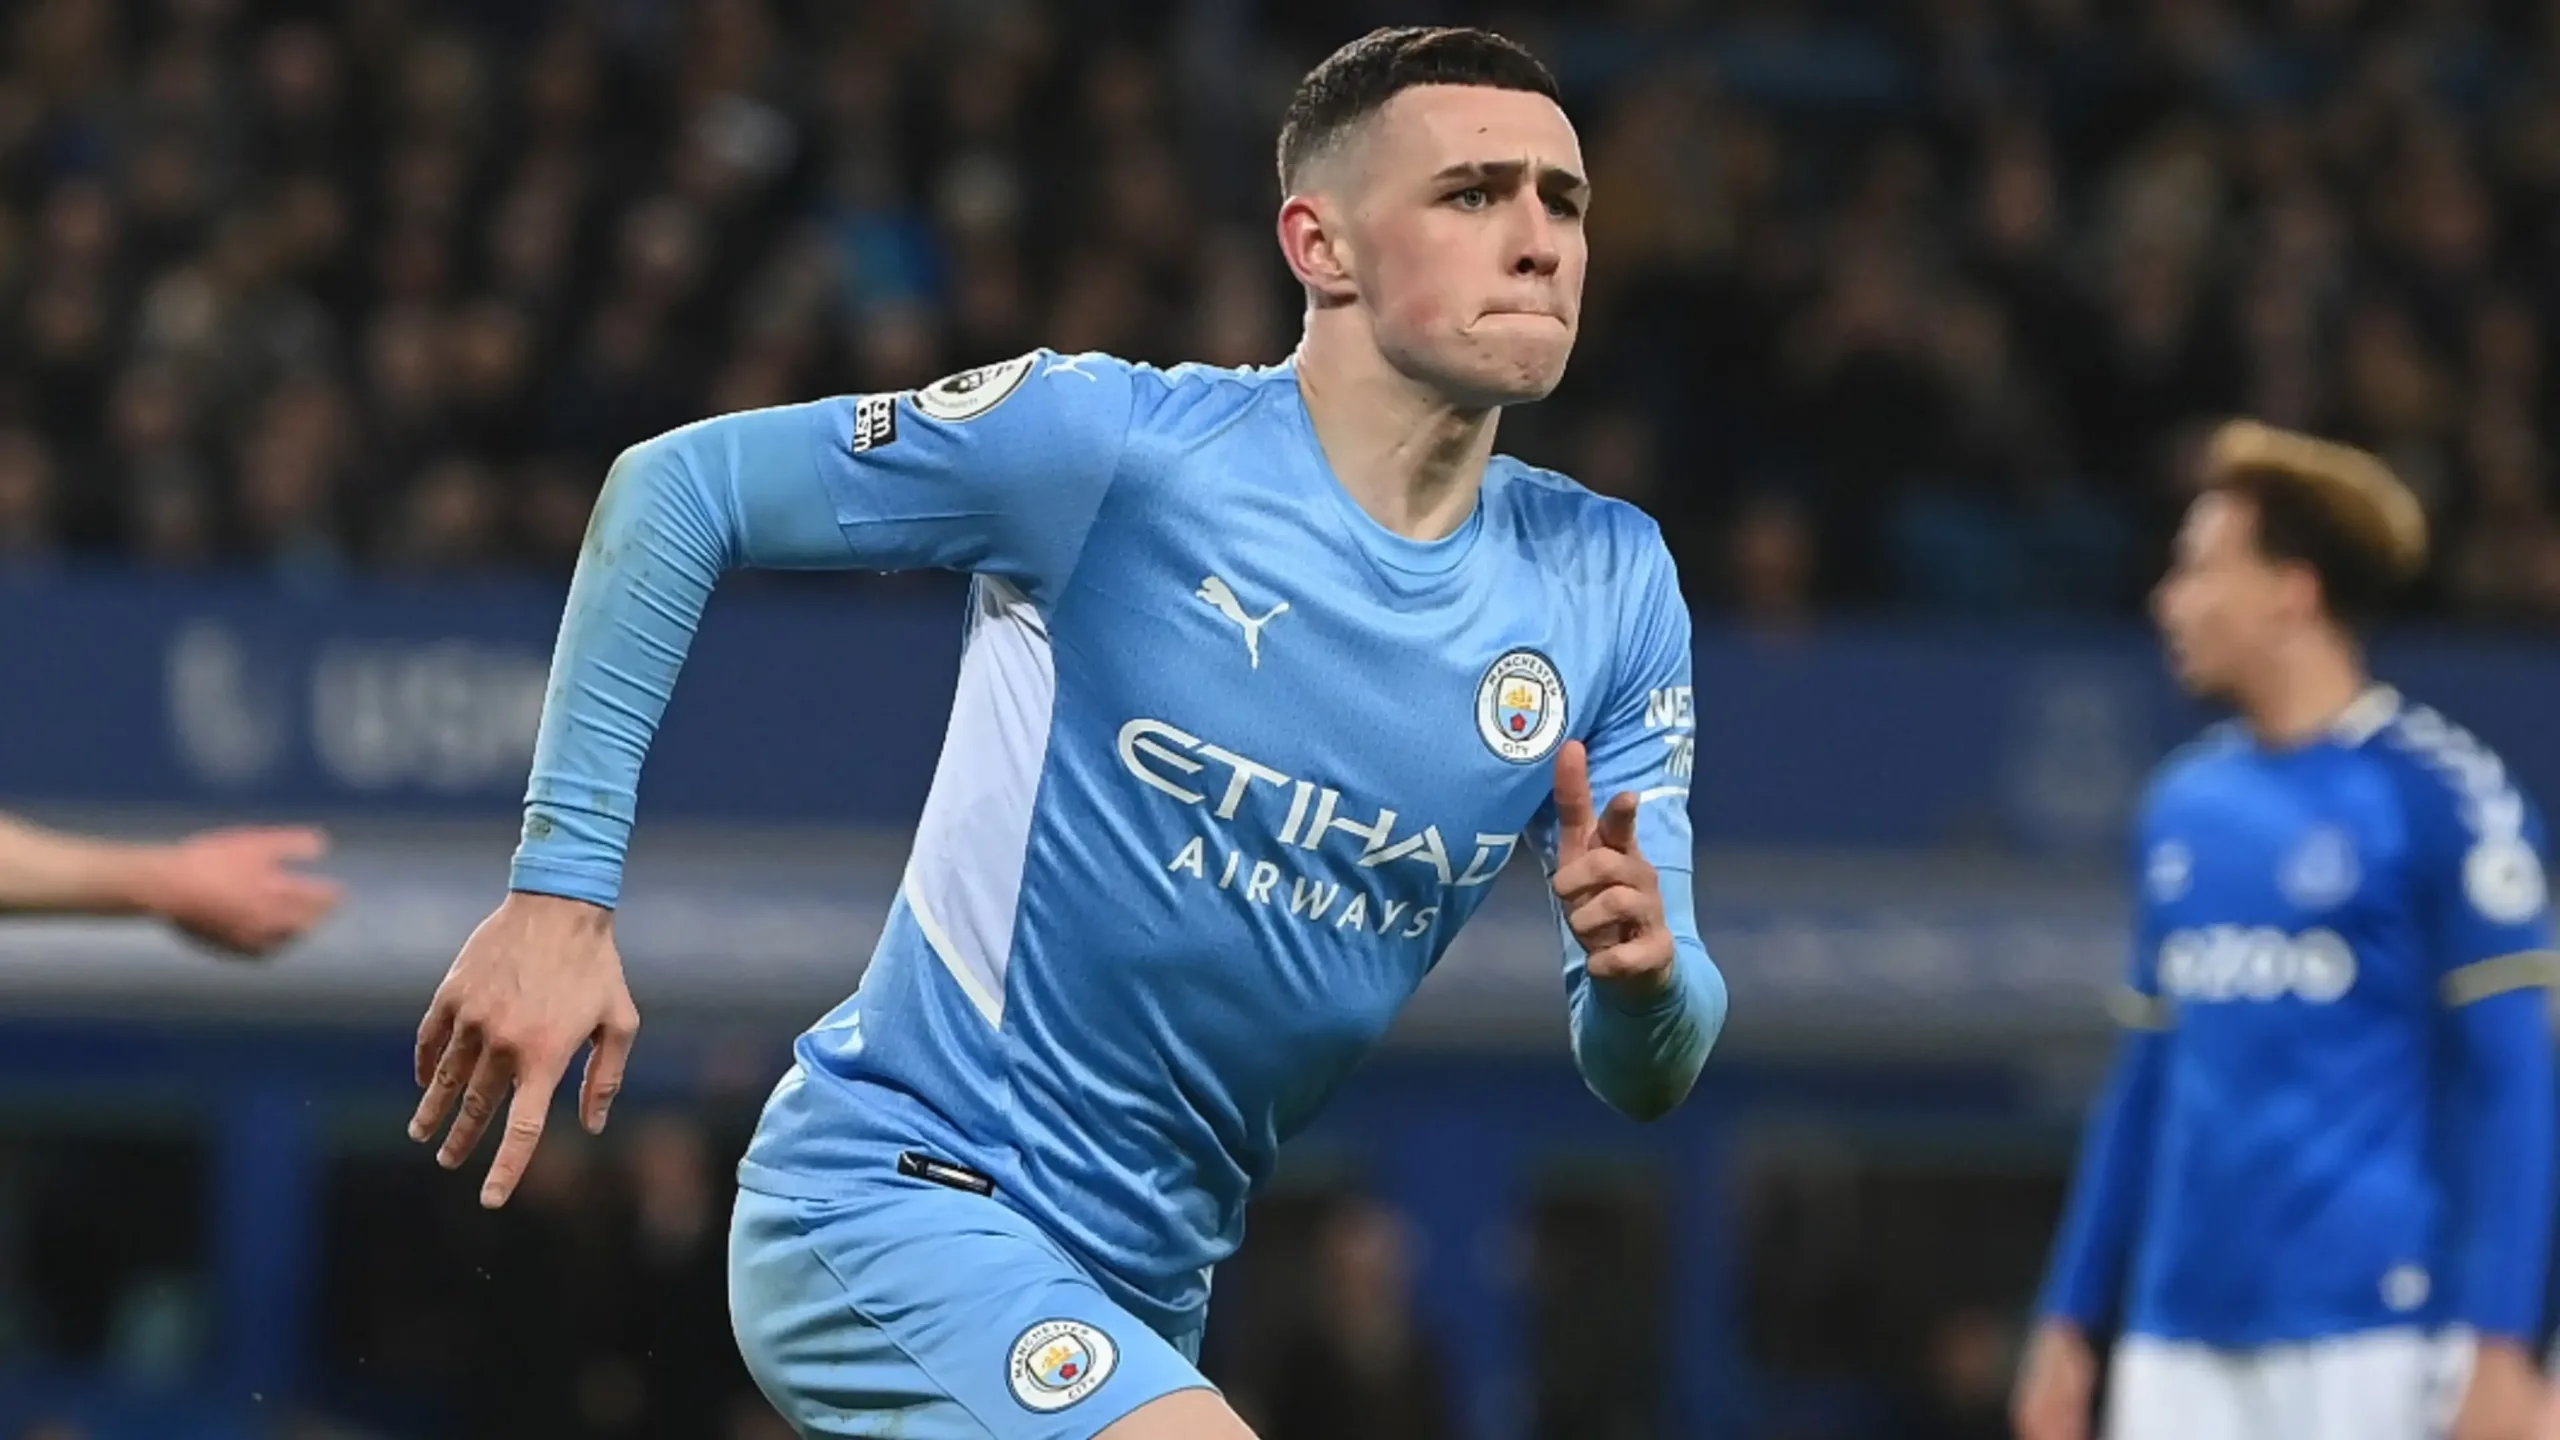 Phil Foden (Manchester City) is an example of how wingers use their first touch to generate advantage. Learn the secrets of what we consider a good first touch for wingers, based on their situation on the field and their opponents.